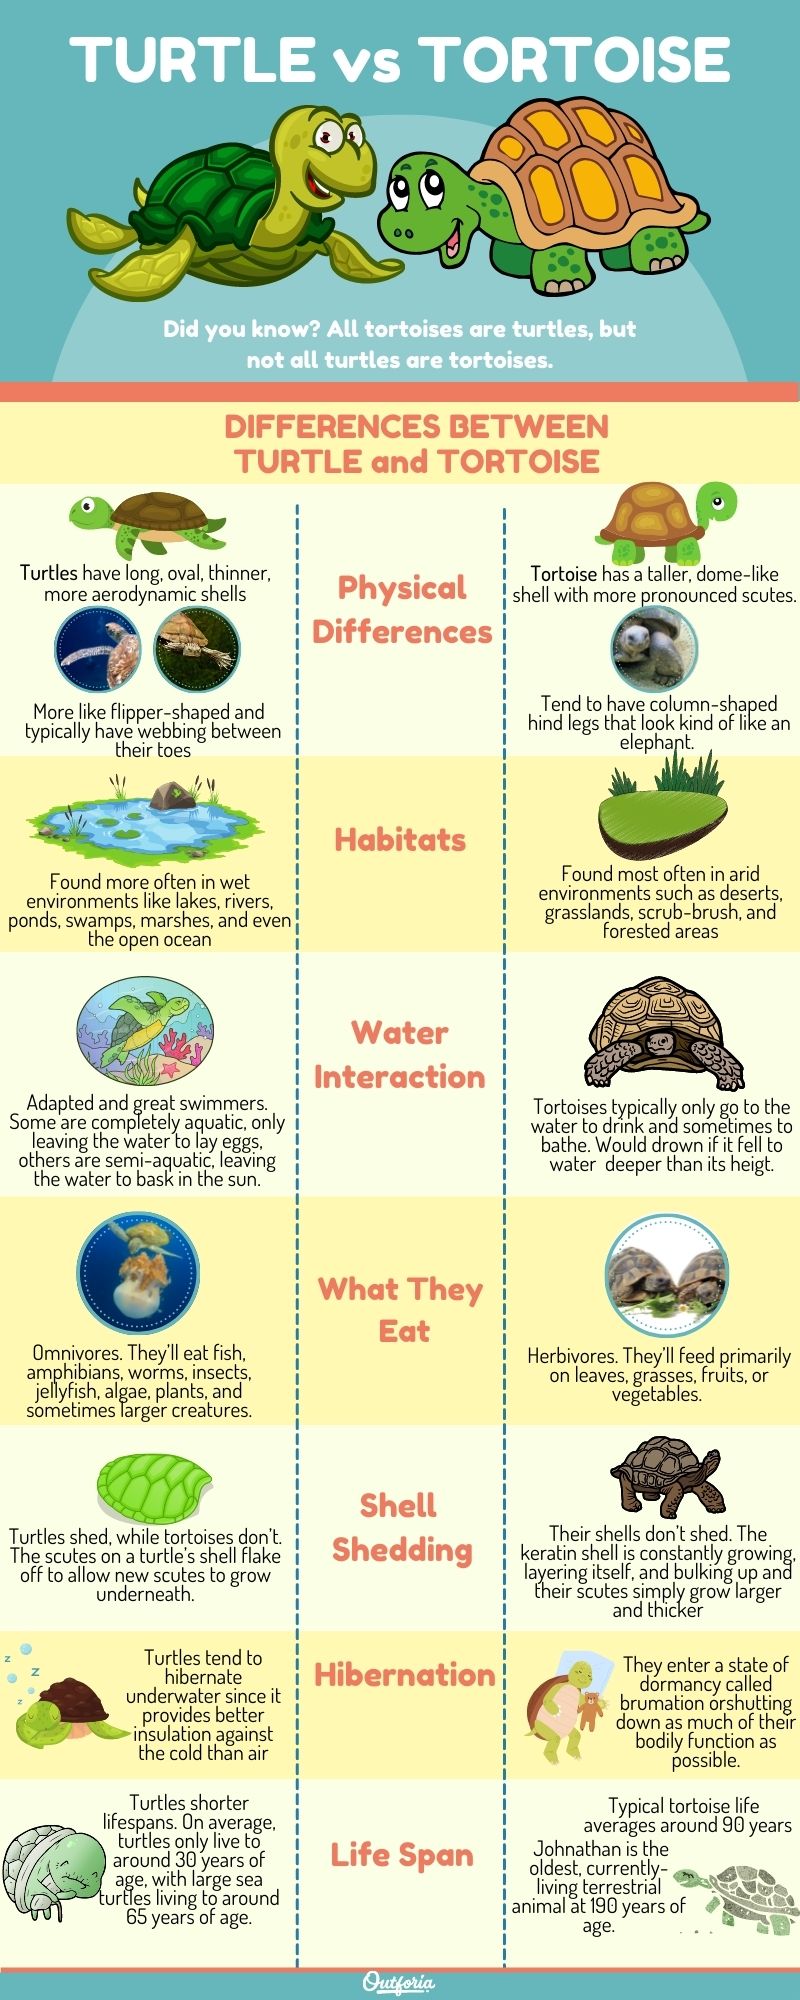 turtle vs tortoise, chart and infographic showing all the differences between turtle and tortoises, in terms of physical differences, habitats, water interaction, what they eat, shell shedding, hibernation, life span and more